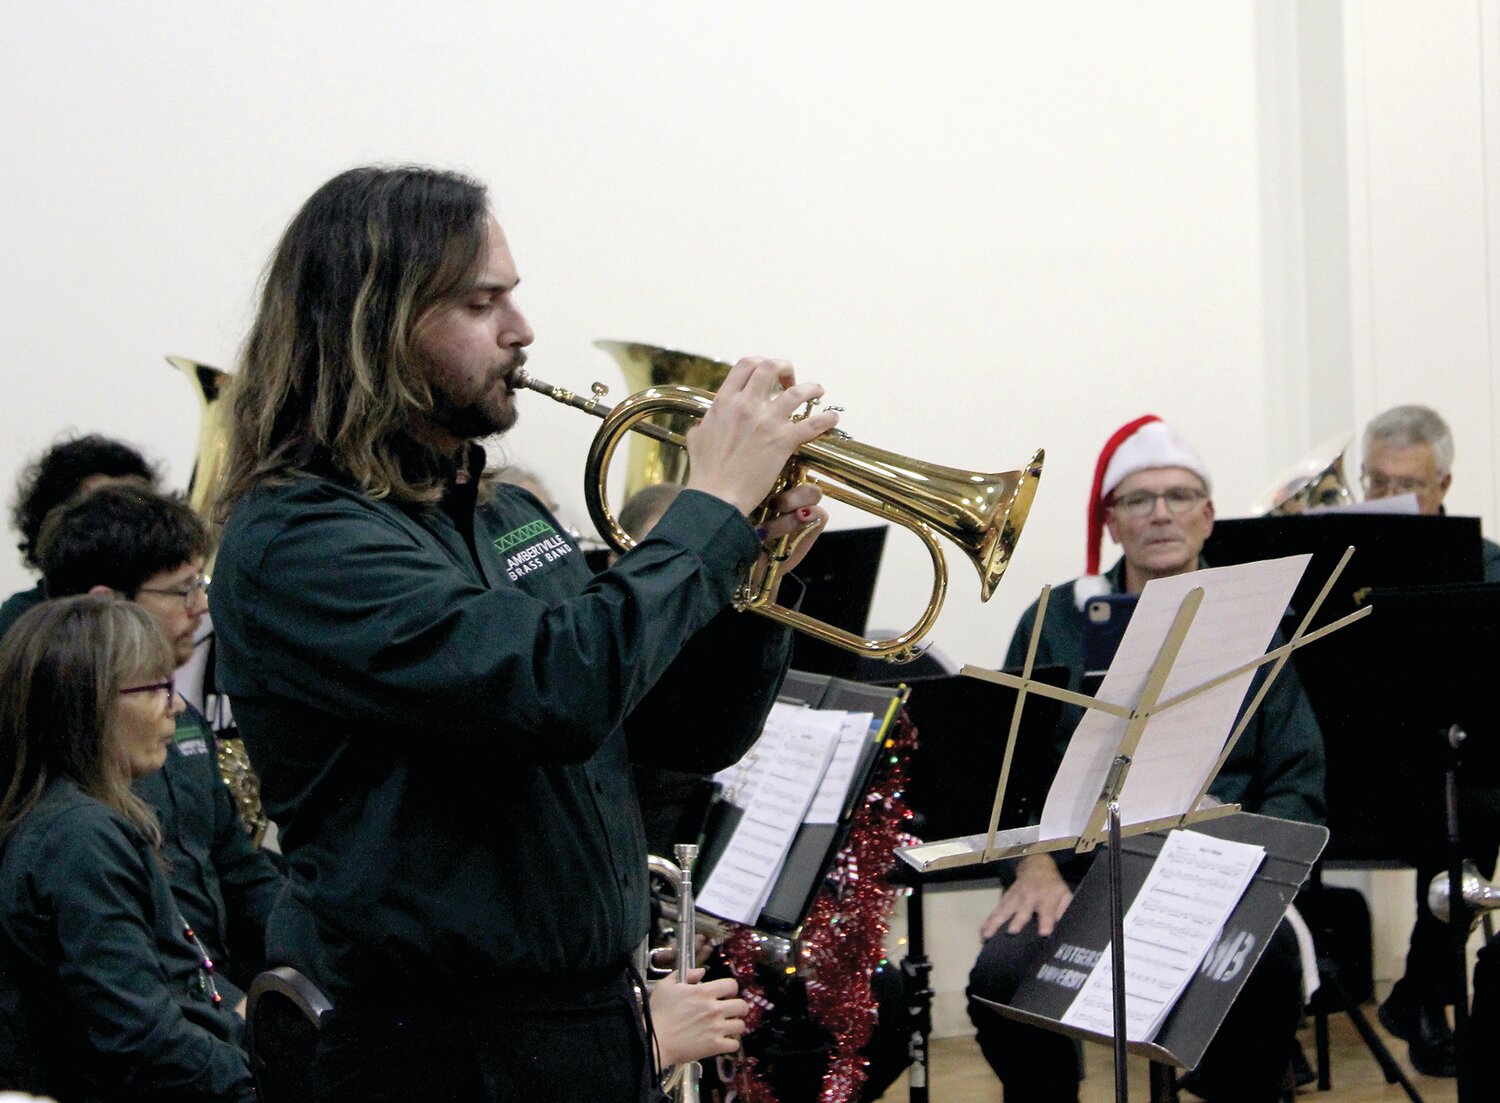 Flugelhorn player Devon Mastrich of the Lambertville Brass Band performs a solo in the English rendition of “Away in a Manger” during a holiday party that the Veterans of Hunterdon County presented to the residents of Veterans Haven North.